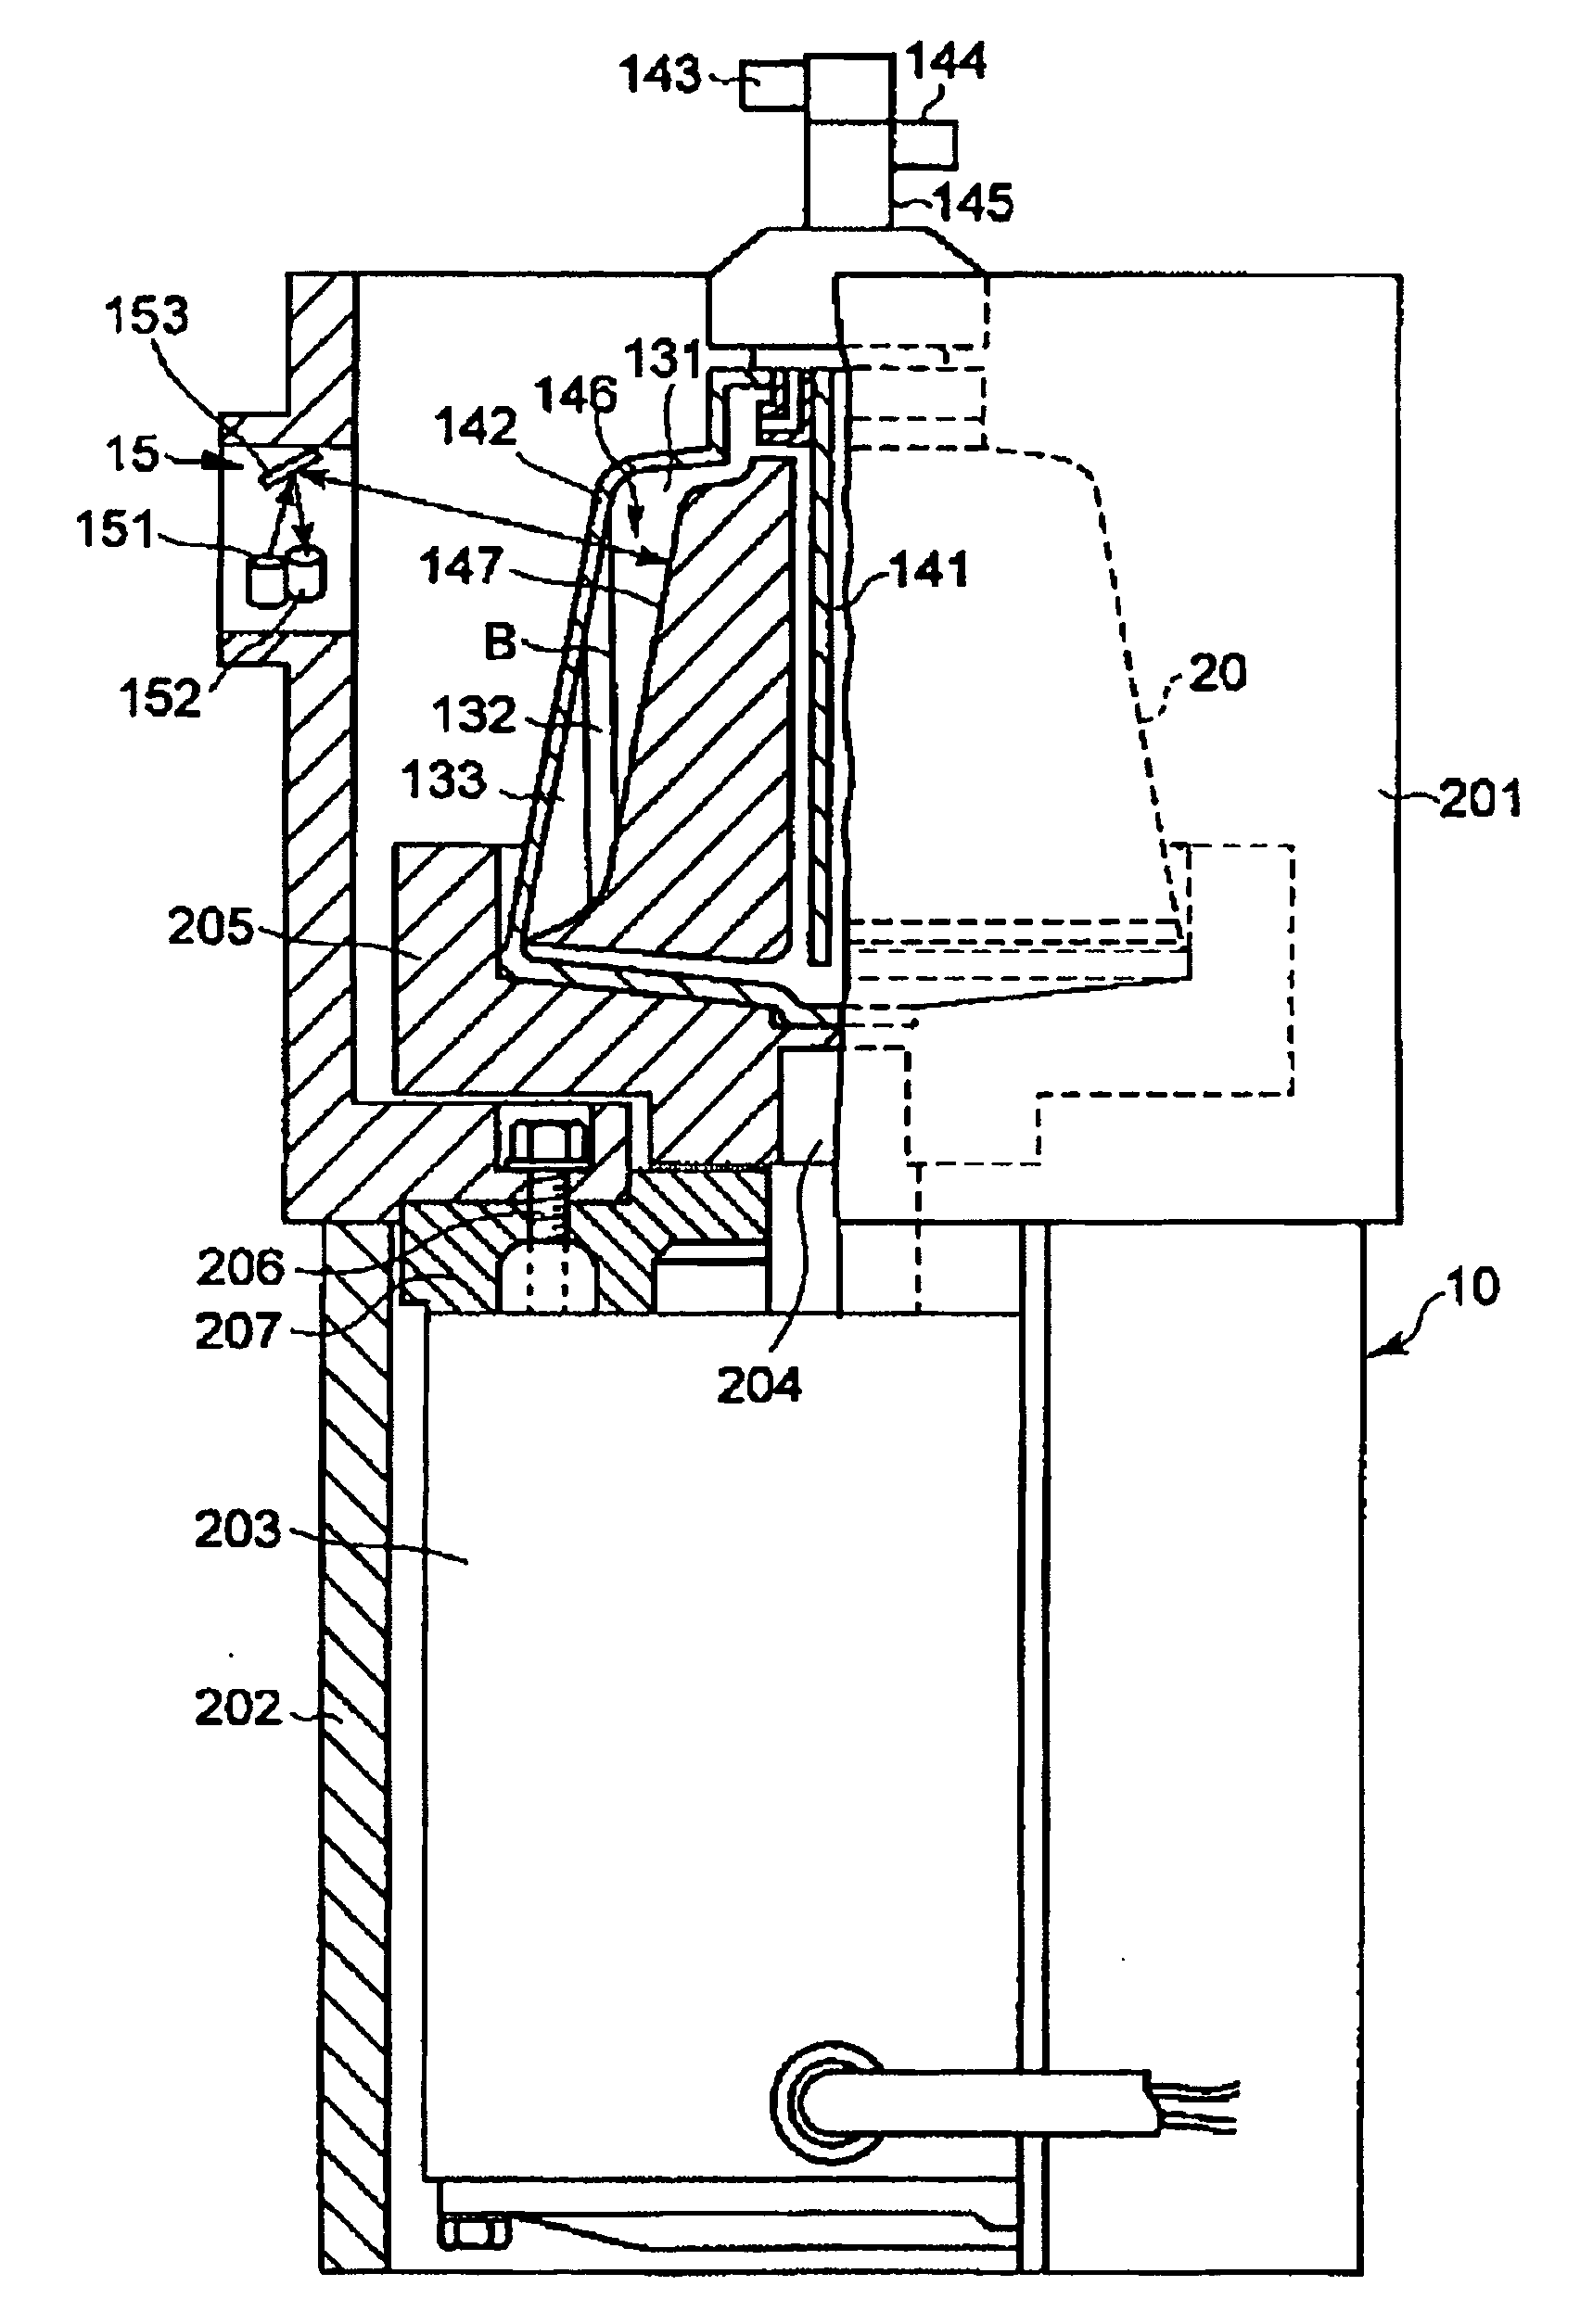 Circuit For Collecting Blood Component And Apparatus For Collecting Blood Component